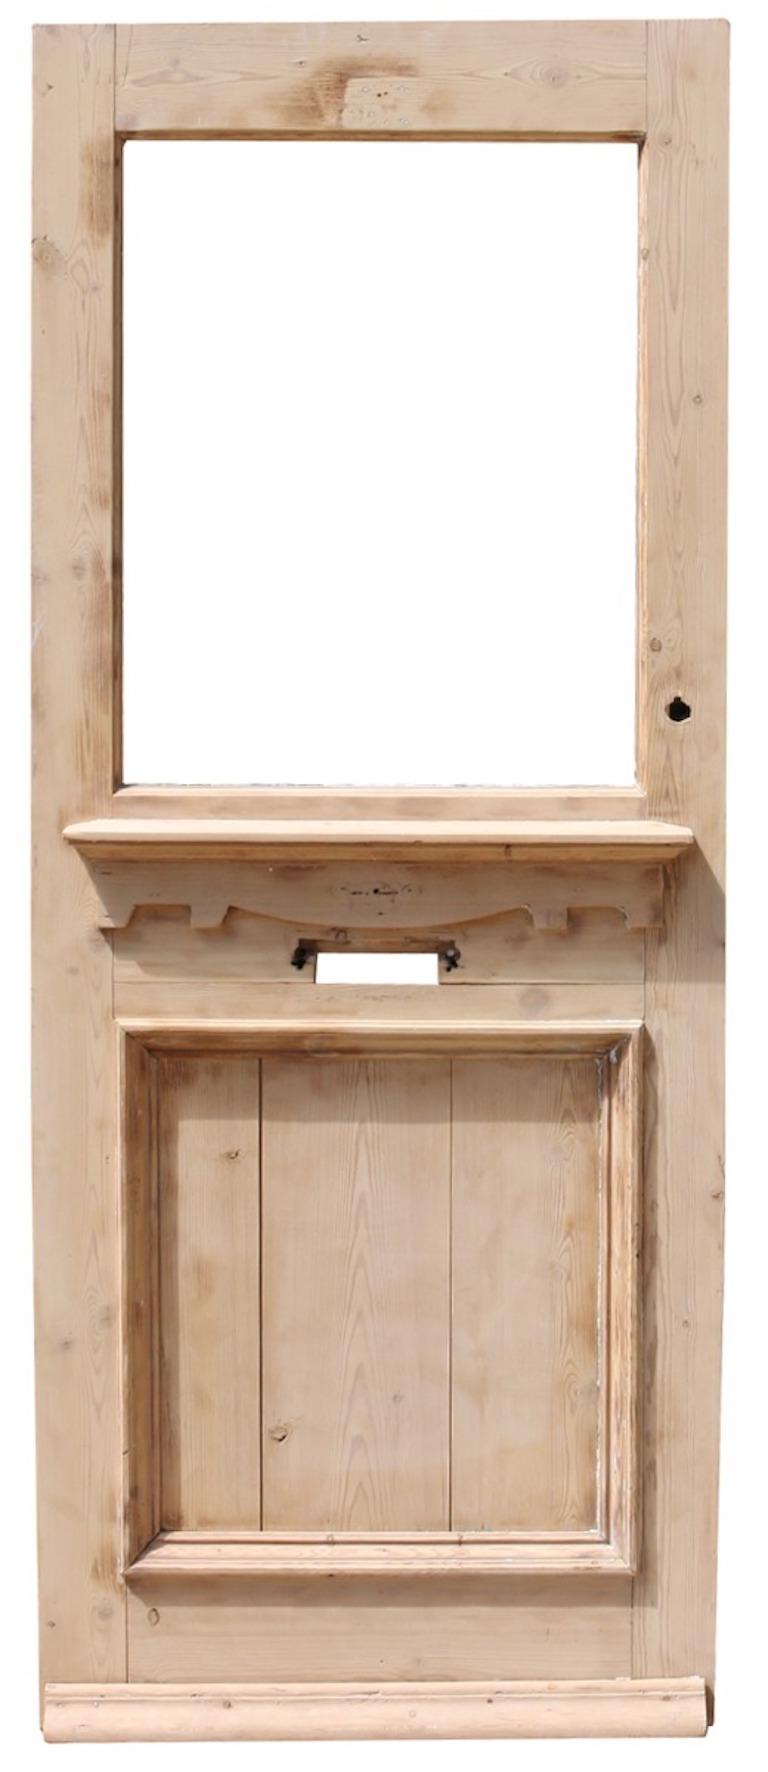 A salvaged front door constructed from pine, for glazing.